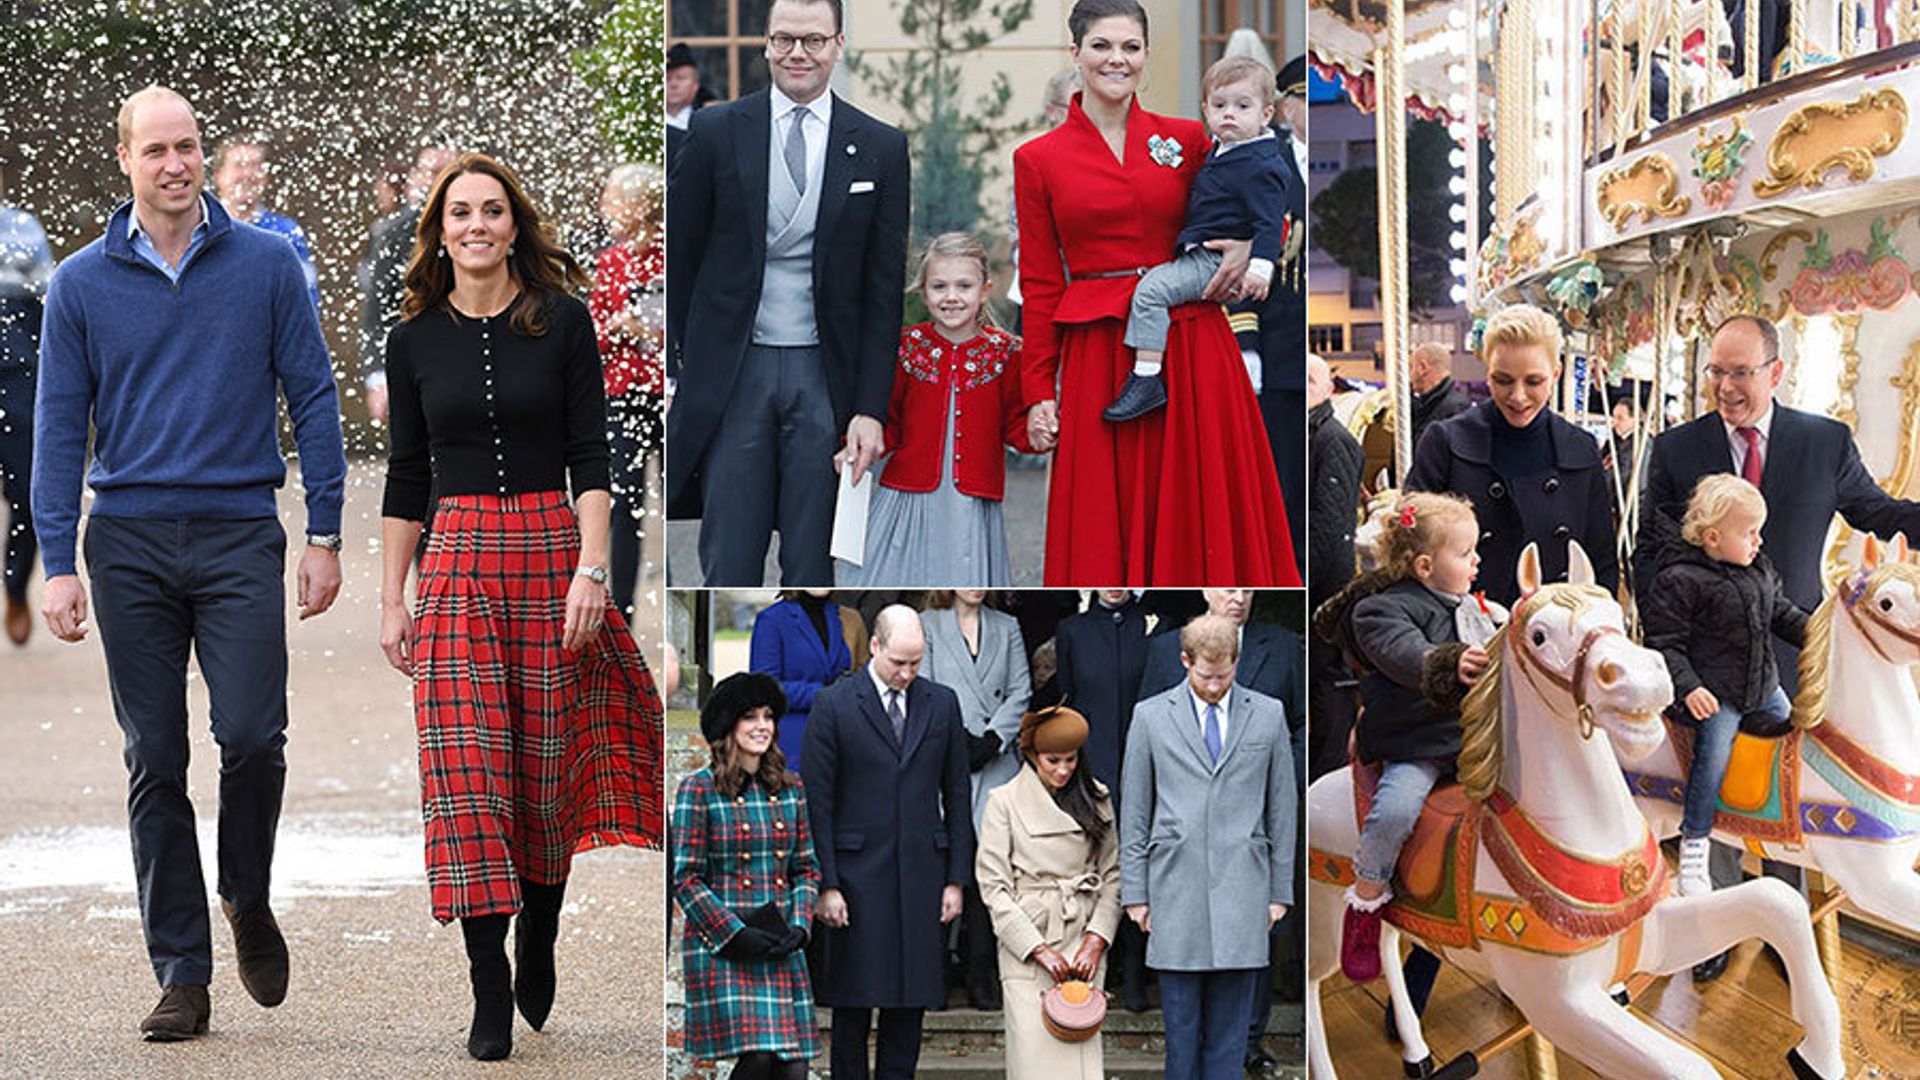 The holiday traditions and treats of Europe’s royal families